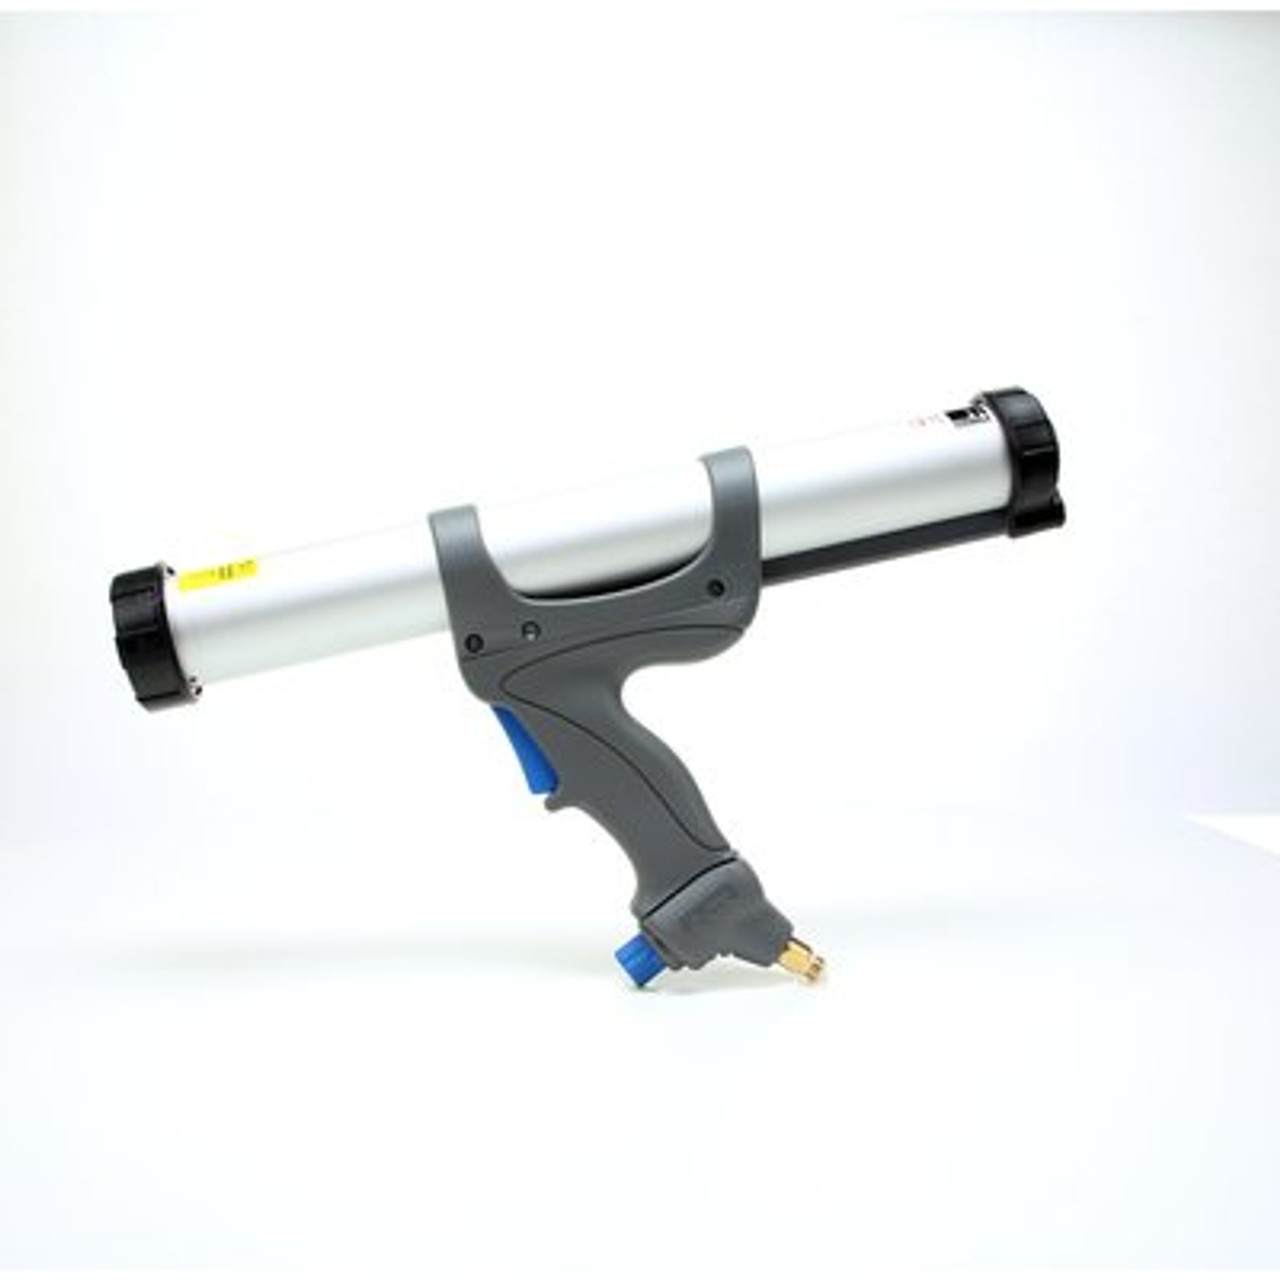 3M™ Pneumatic Applicator 600A, (for 600 mL Sausage Packs)